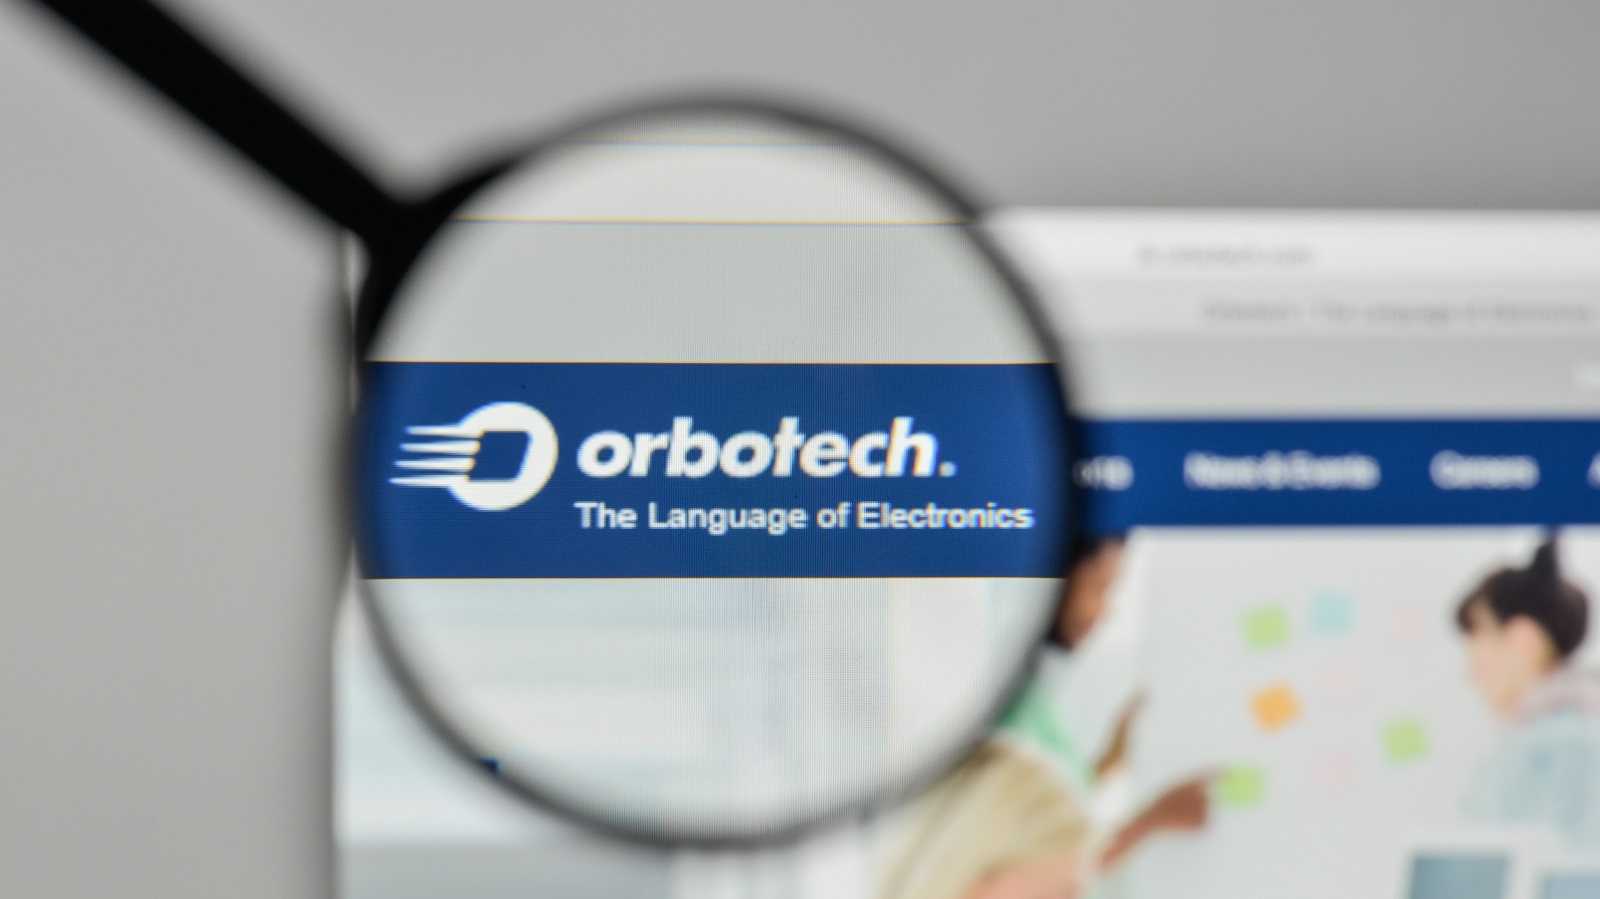 Orbotech image by Casimiro PT/Shutterstock.com